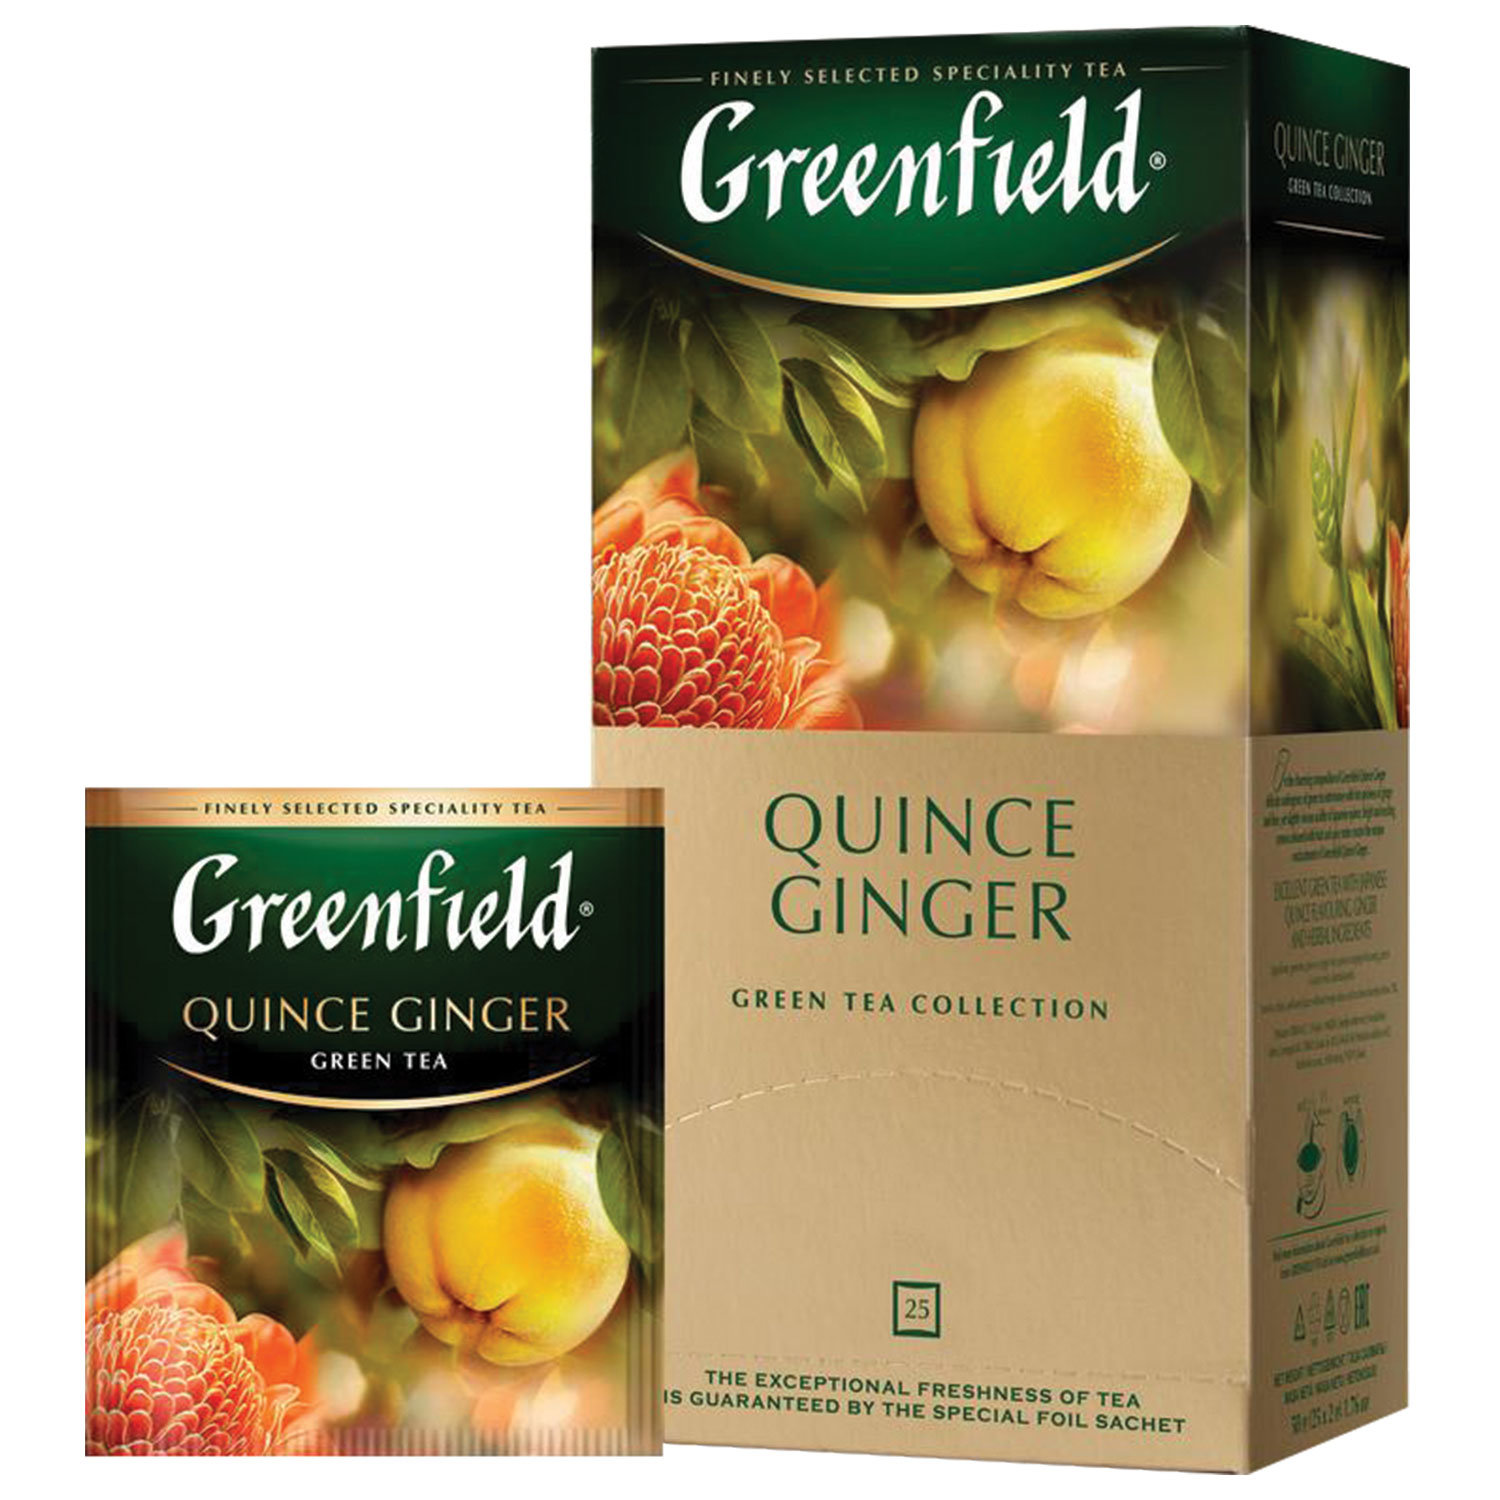  GREENFIELD Quince Ginge 1388-10, 25 